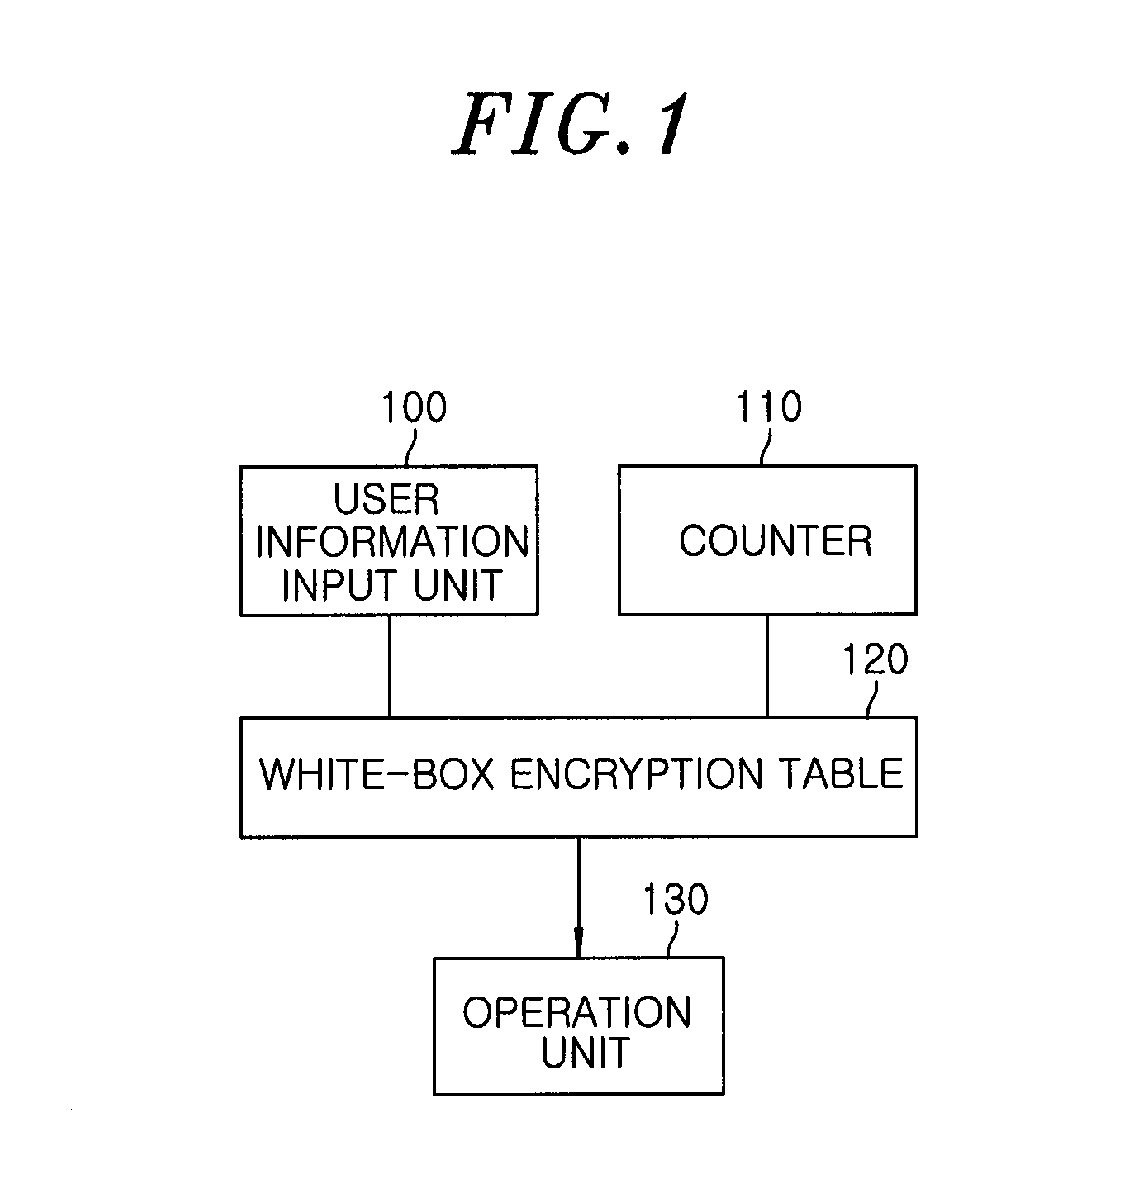 Content protection apparatus and content encryption and decryption apparatus using white-box encryption table